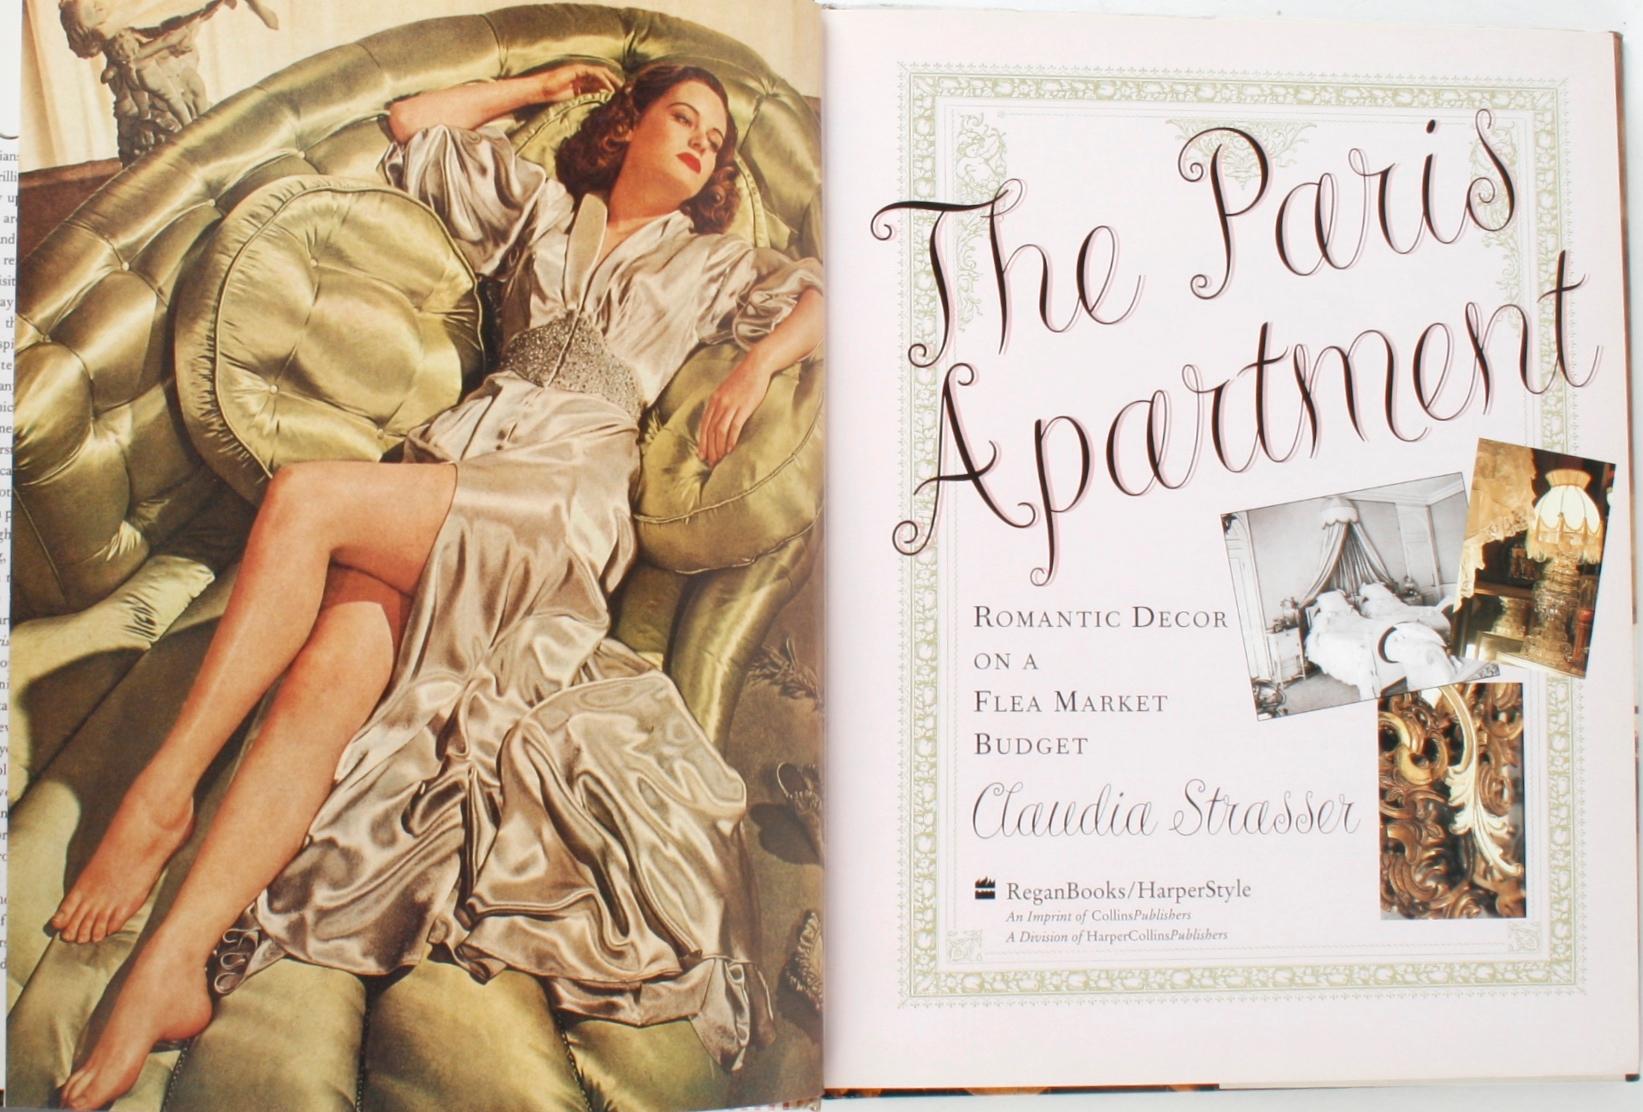 The Paris Apartment by Claudia Strasser. HarperCollins, 1997. Stated first edition hardcover with dust jacket. The Paris Apartment is a popular shop in New York's East Village. Tips on budgeting; guidance on shopping at flea markets and auctions;